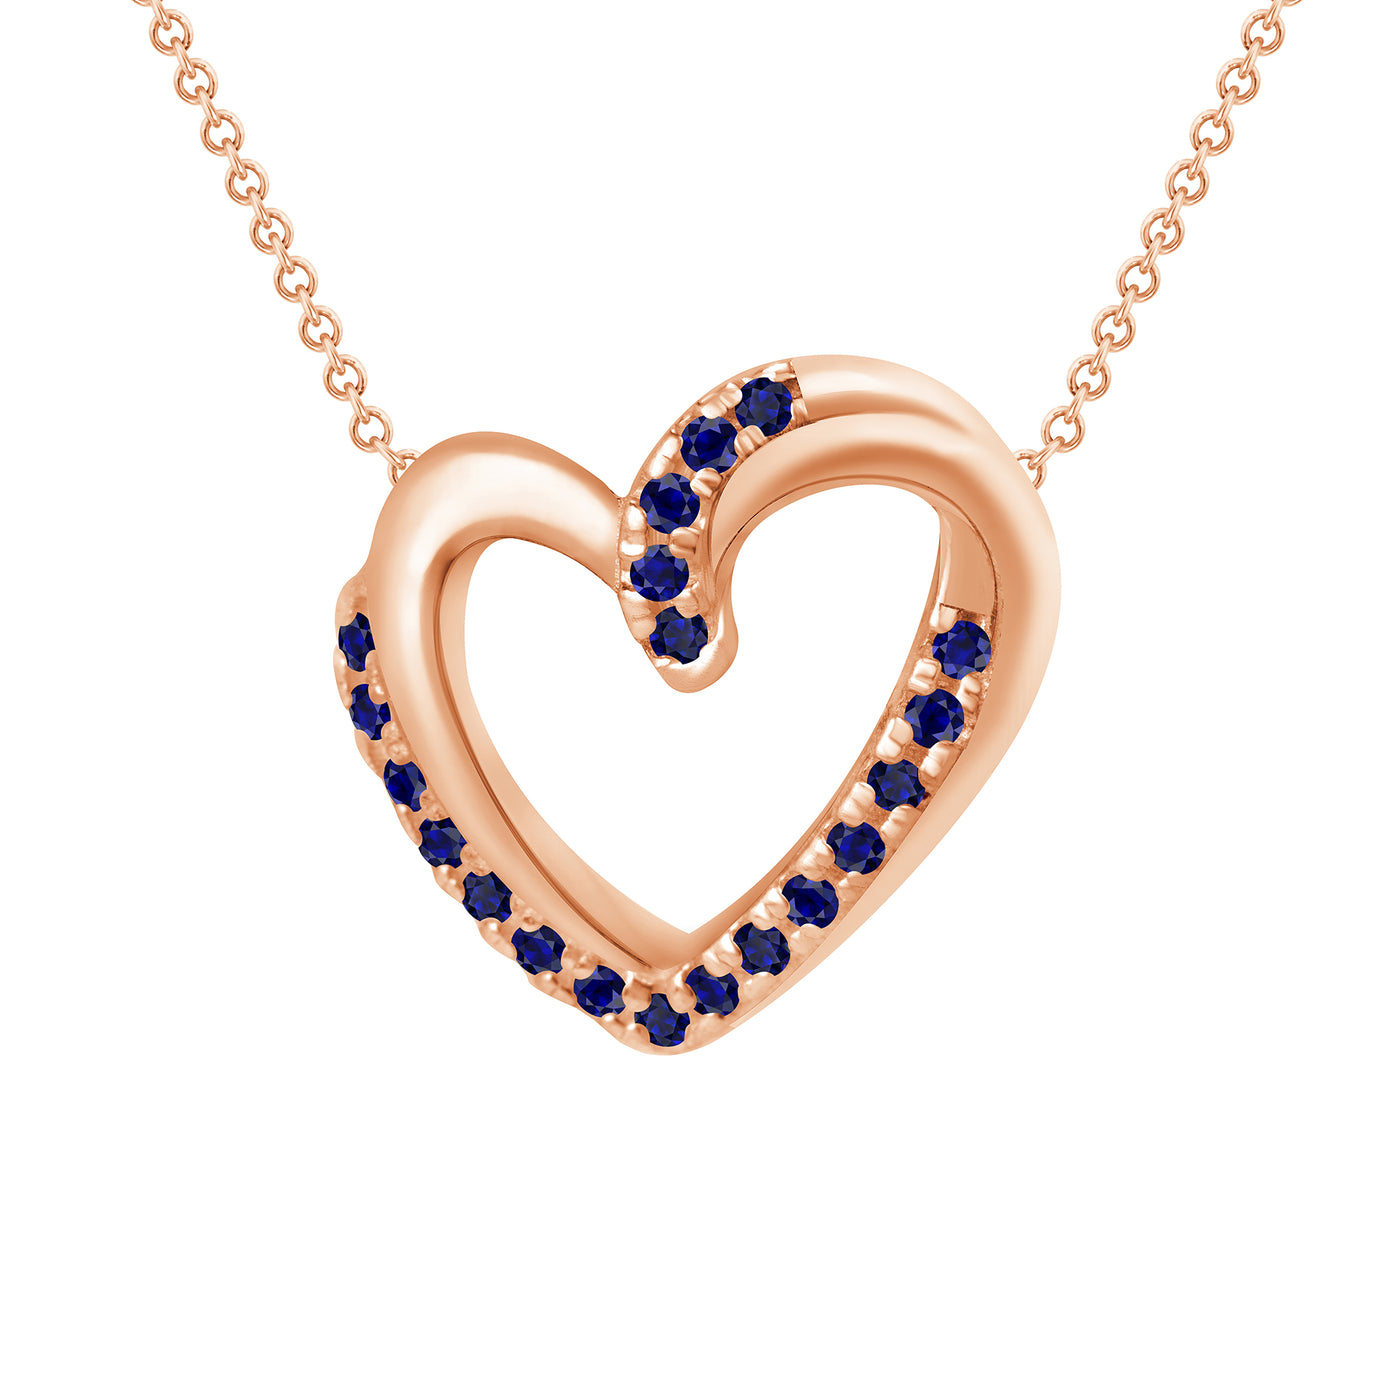 Love Heart Pendant 0.20 Carat Round Cut Blue Sapphire Pendant in Yellow, Rose or White Gold 16" Chain